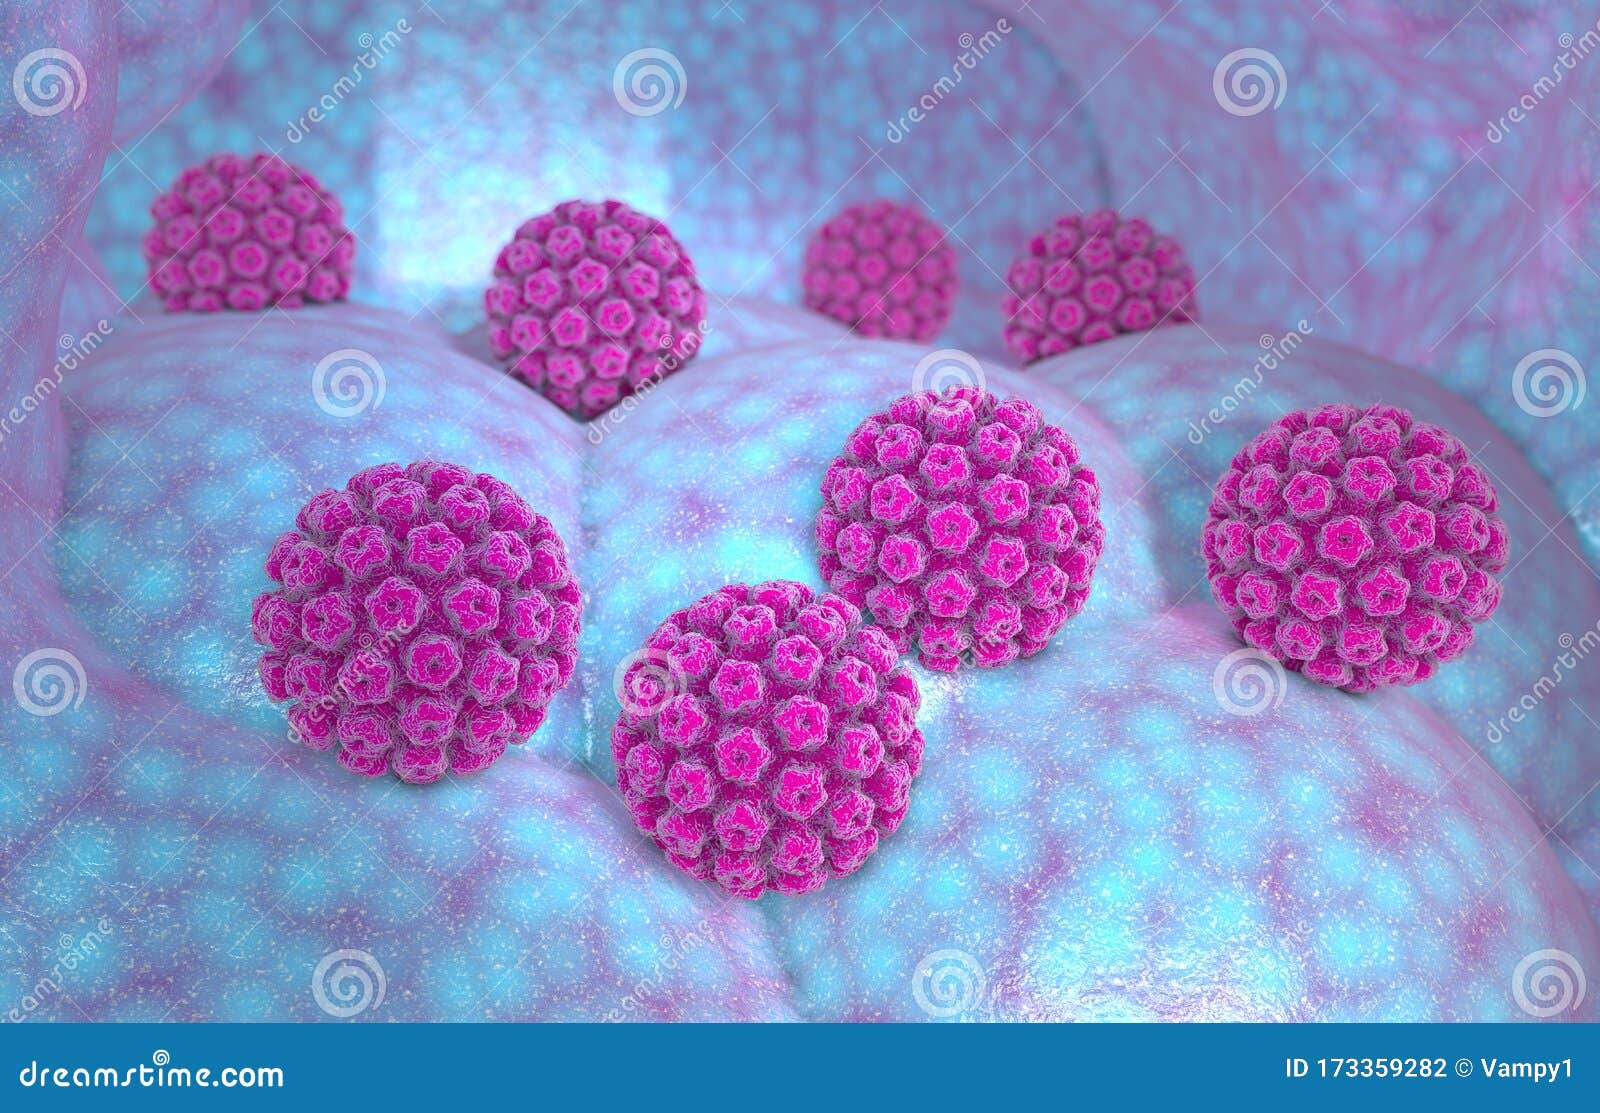 human papillomavirus infection. virus. hpv is the most common sexually transmitted infection globally.